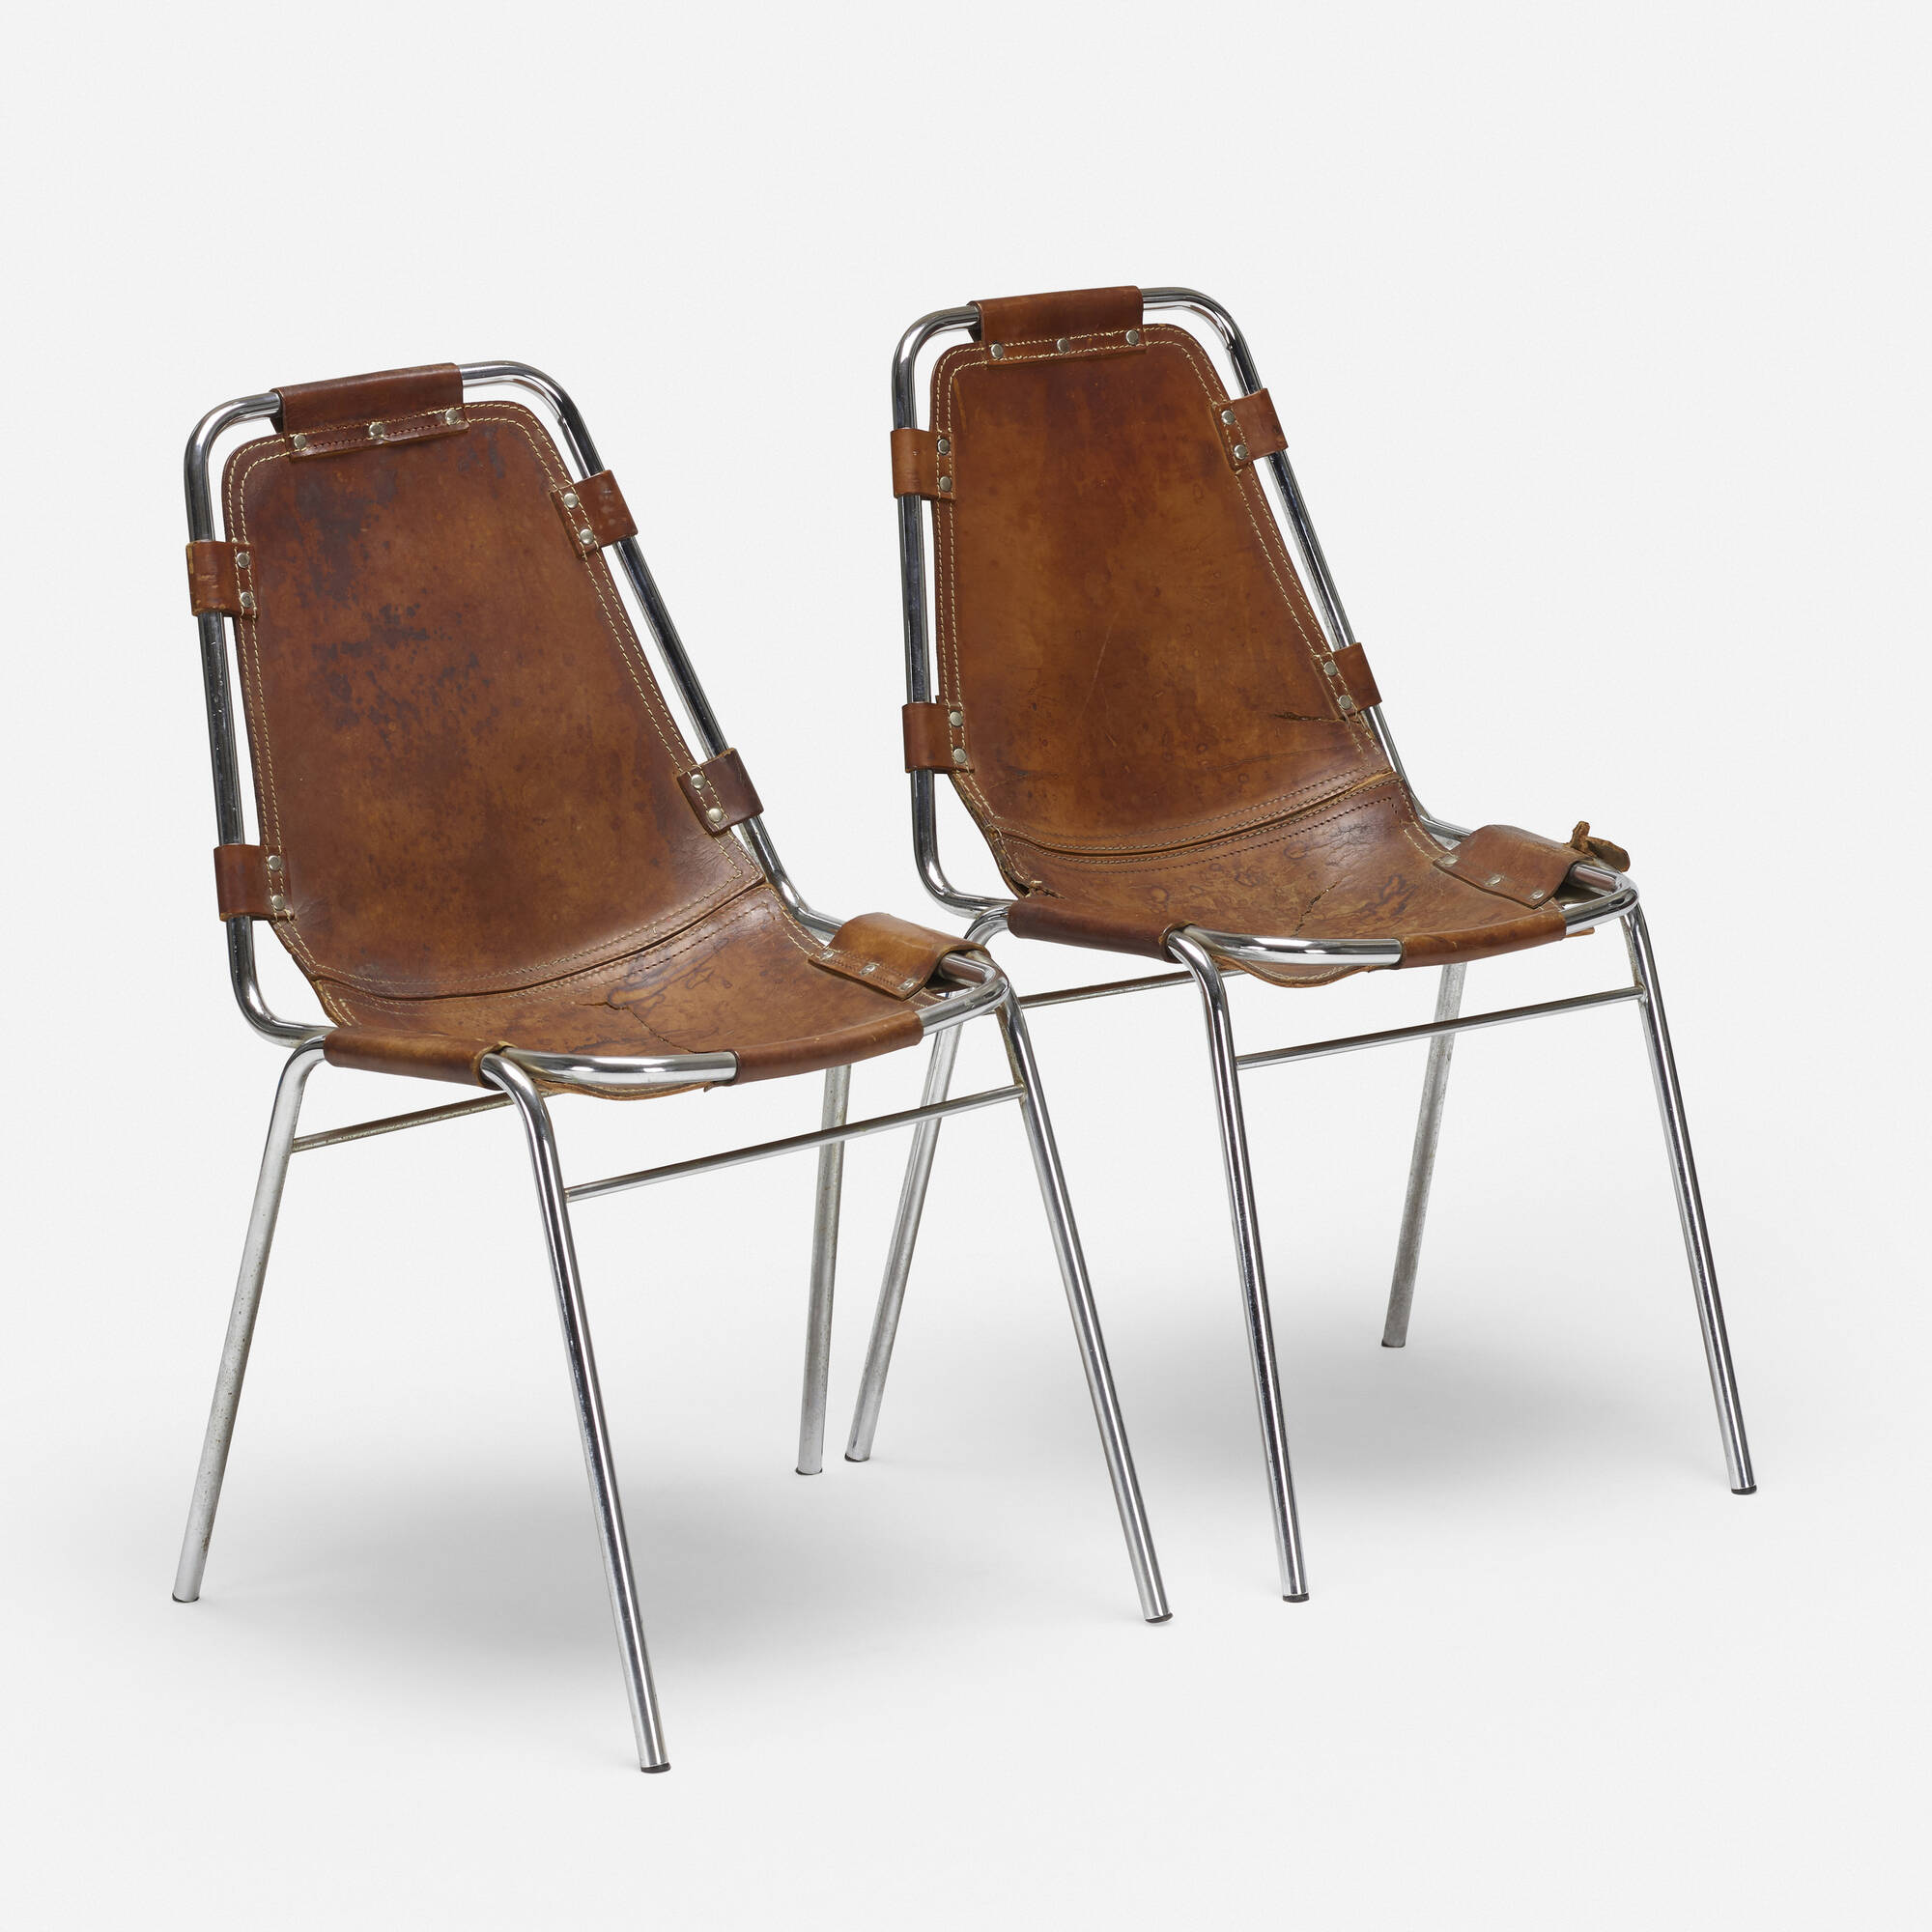 261: CHARLOTTE PERRIAND, dining chairs from Les Arcs, pair < Art + 